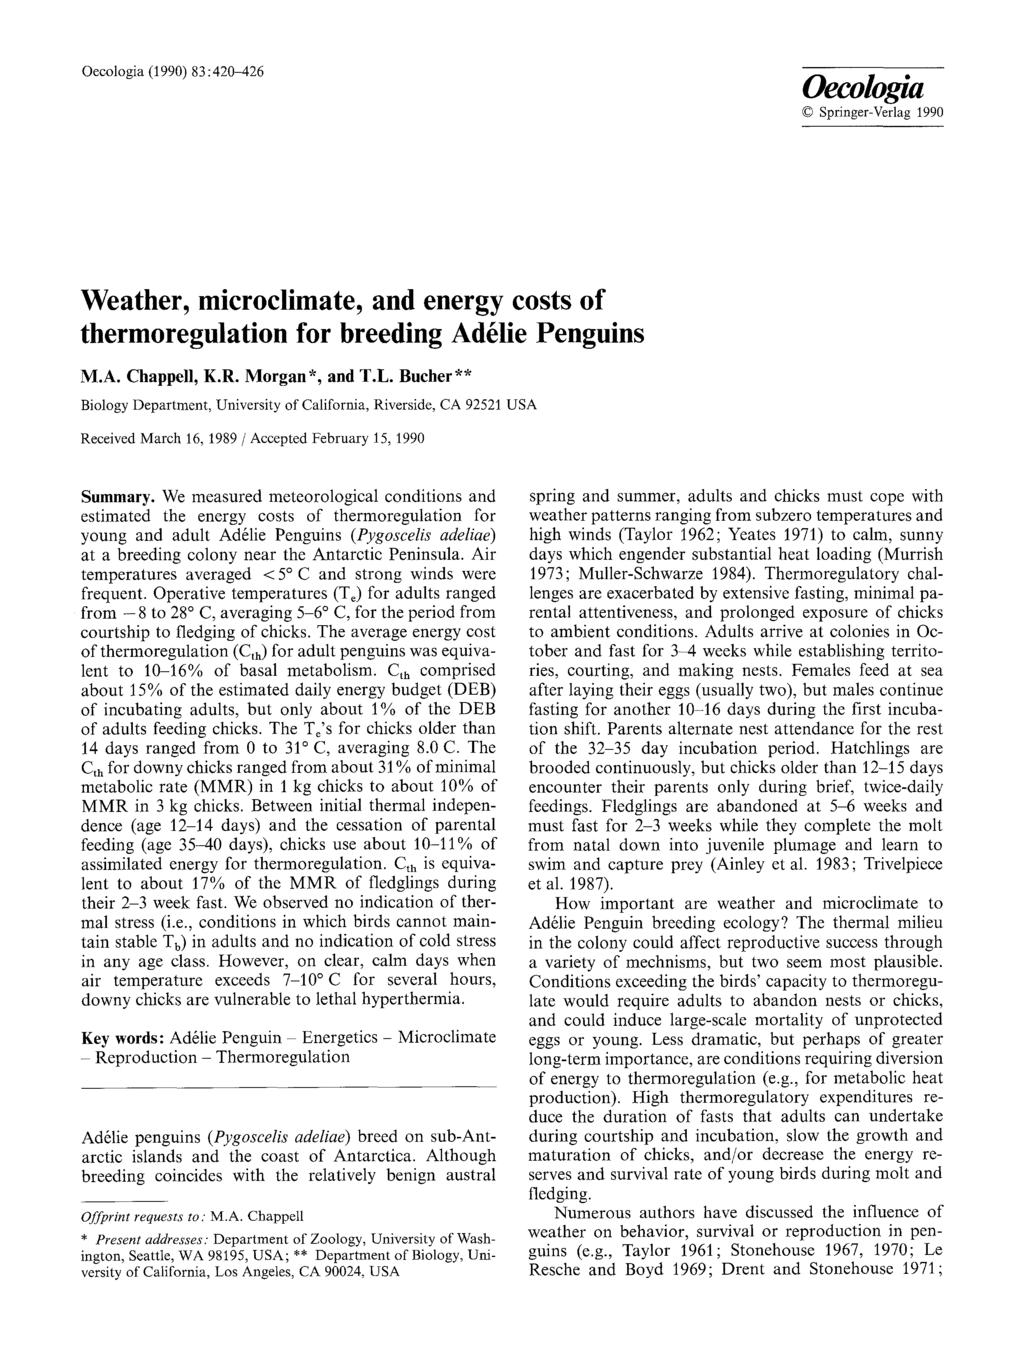 Oecologia (199) 83 : 42-426 Oecologia 9 Springer-Verlag 199 Weather, microclimate, and energy costs of thermoregulation for breeding Ad61ie Penguins M.A. Chappell, K.R. Morgan*, and T.L.